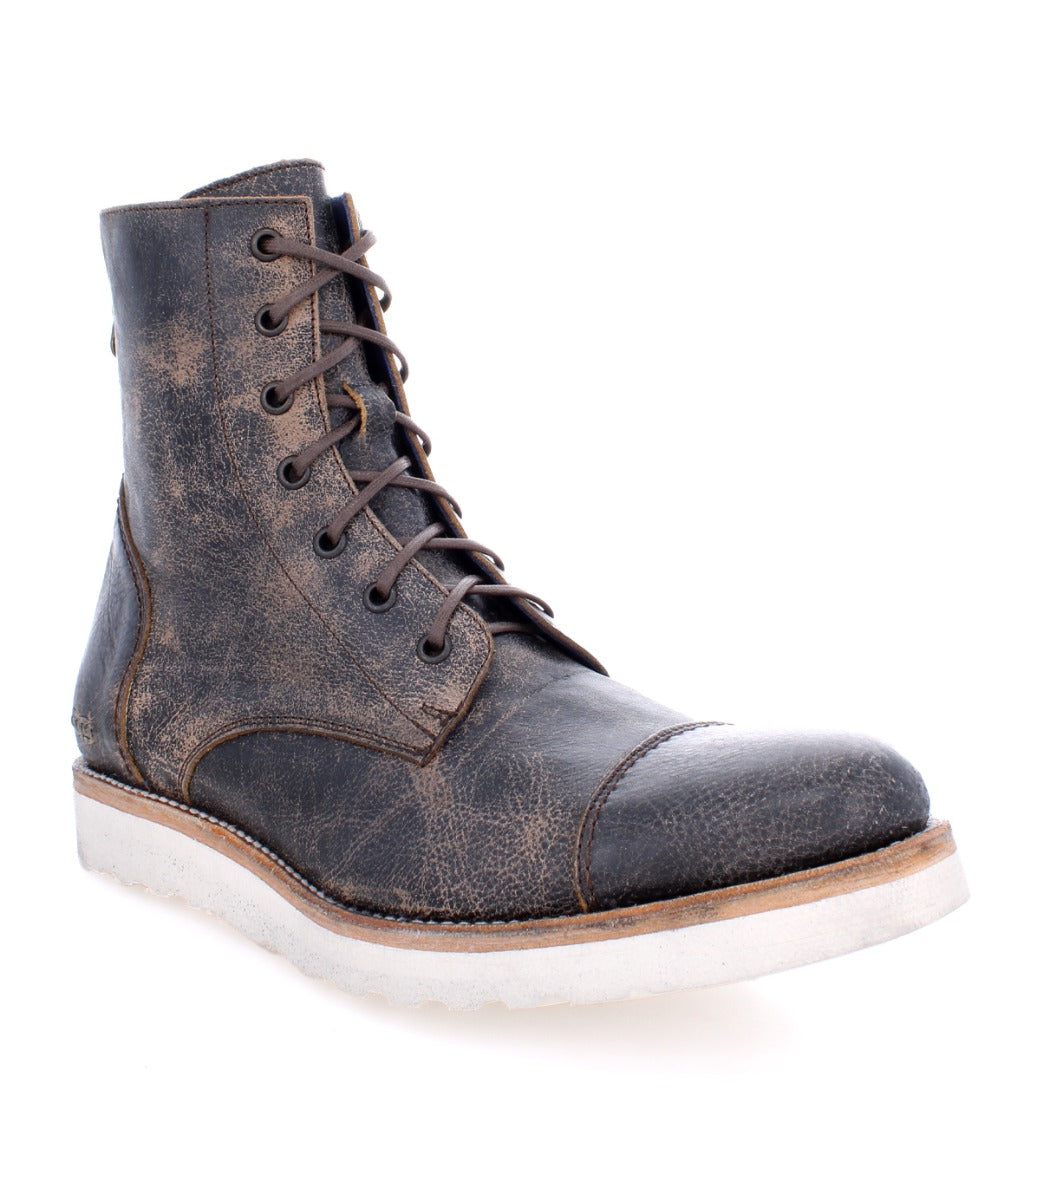 A single Bed Stu Protege Light Black Lux boot with a distressed finish and a white rubber sole, isolated on a white background.